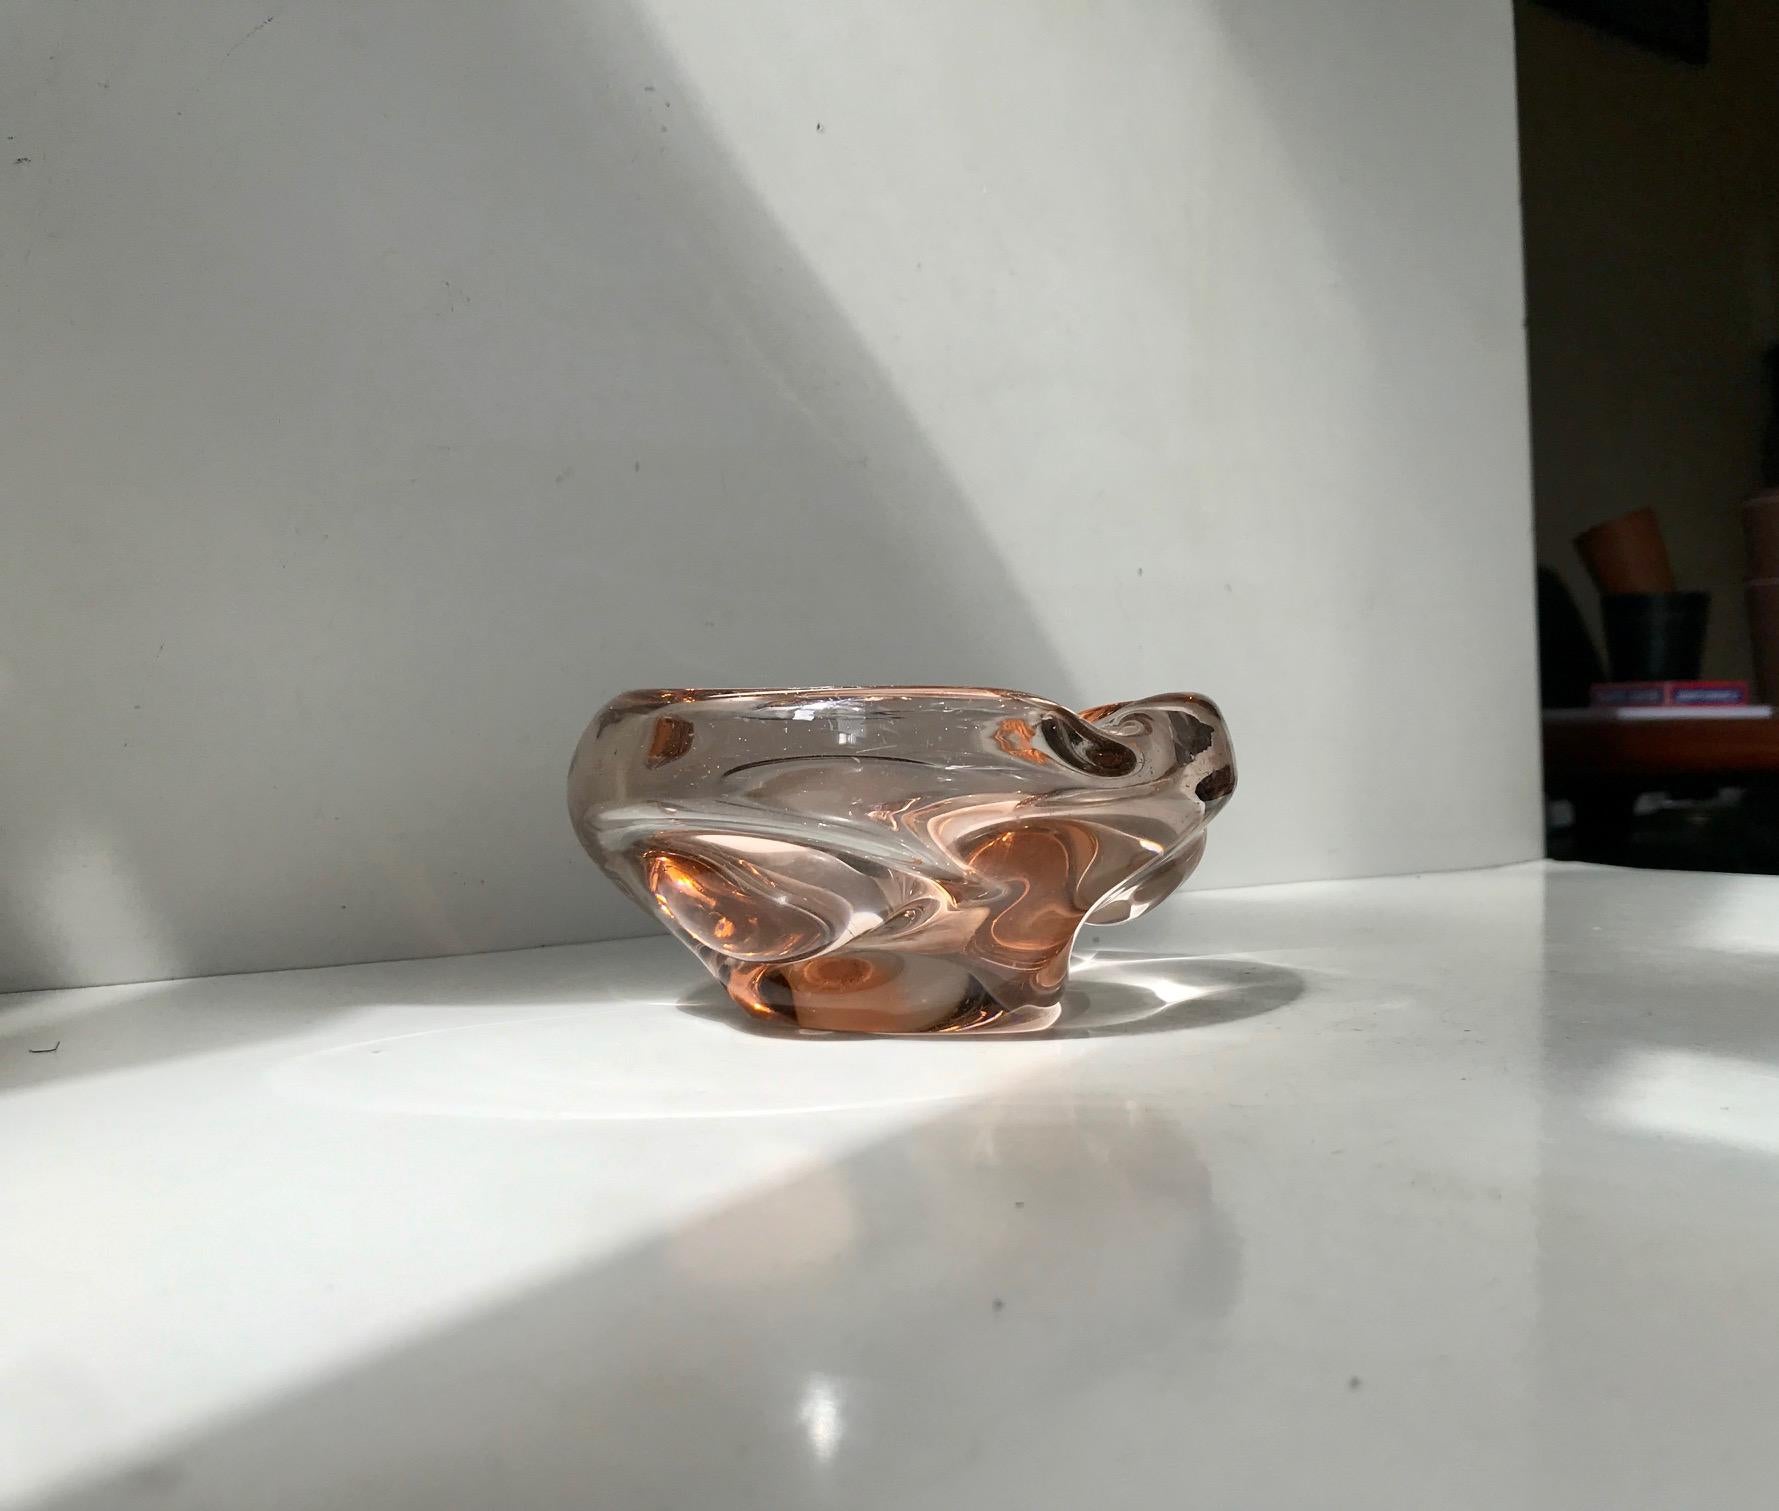 Salmon colored dish or ashtray in submerged/partially collapsed handblown 'Salmon' or Rose glass. Designed by Elis Bergh and manufactured by Kosta Boda in Sweden circa 1930-40. We have not been able to find any markings on its scratches base.